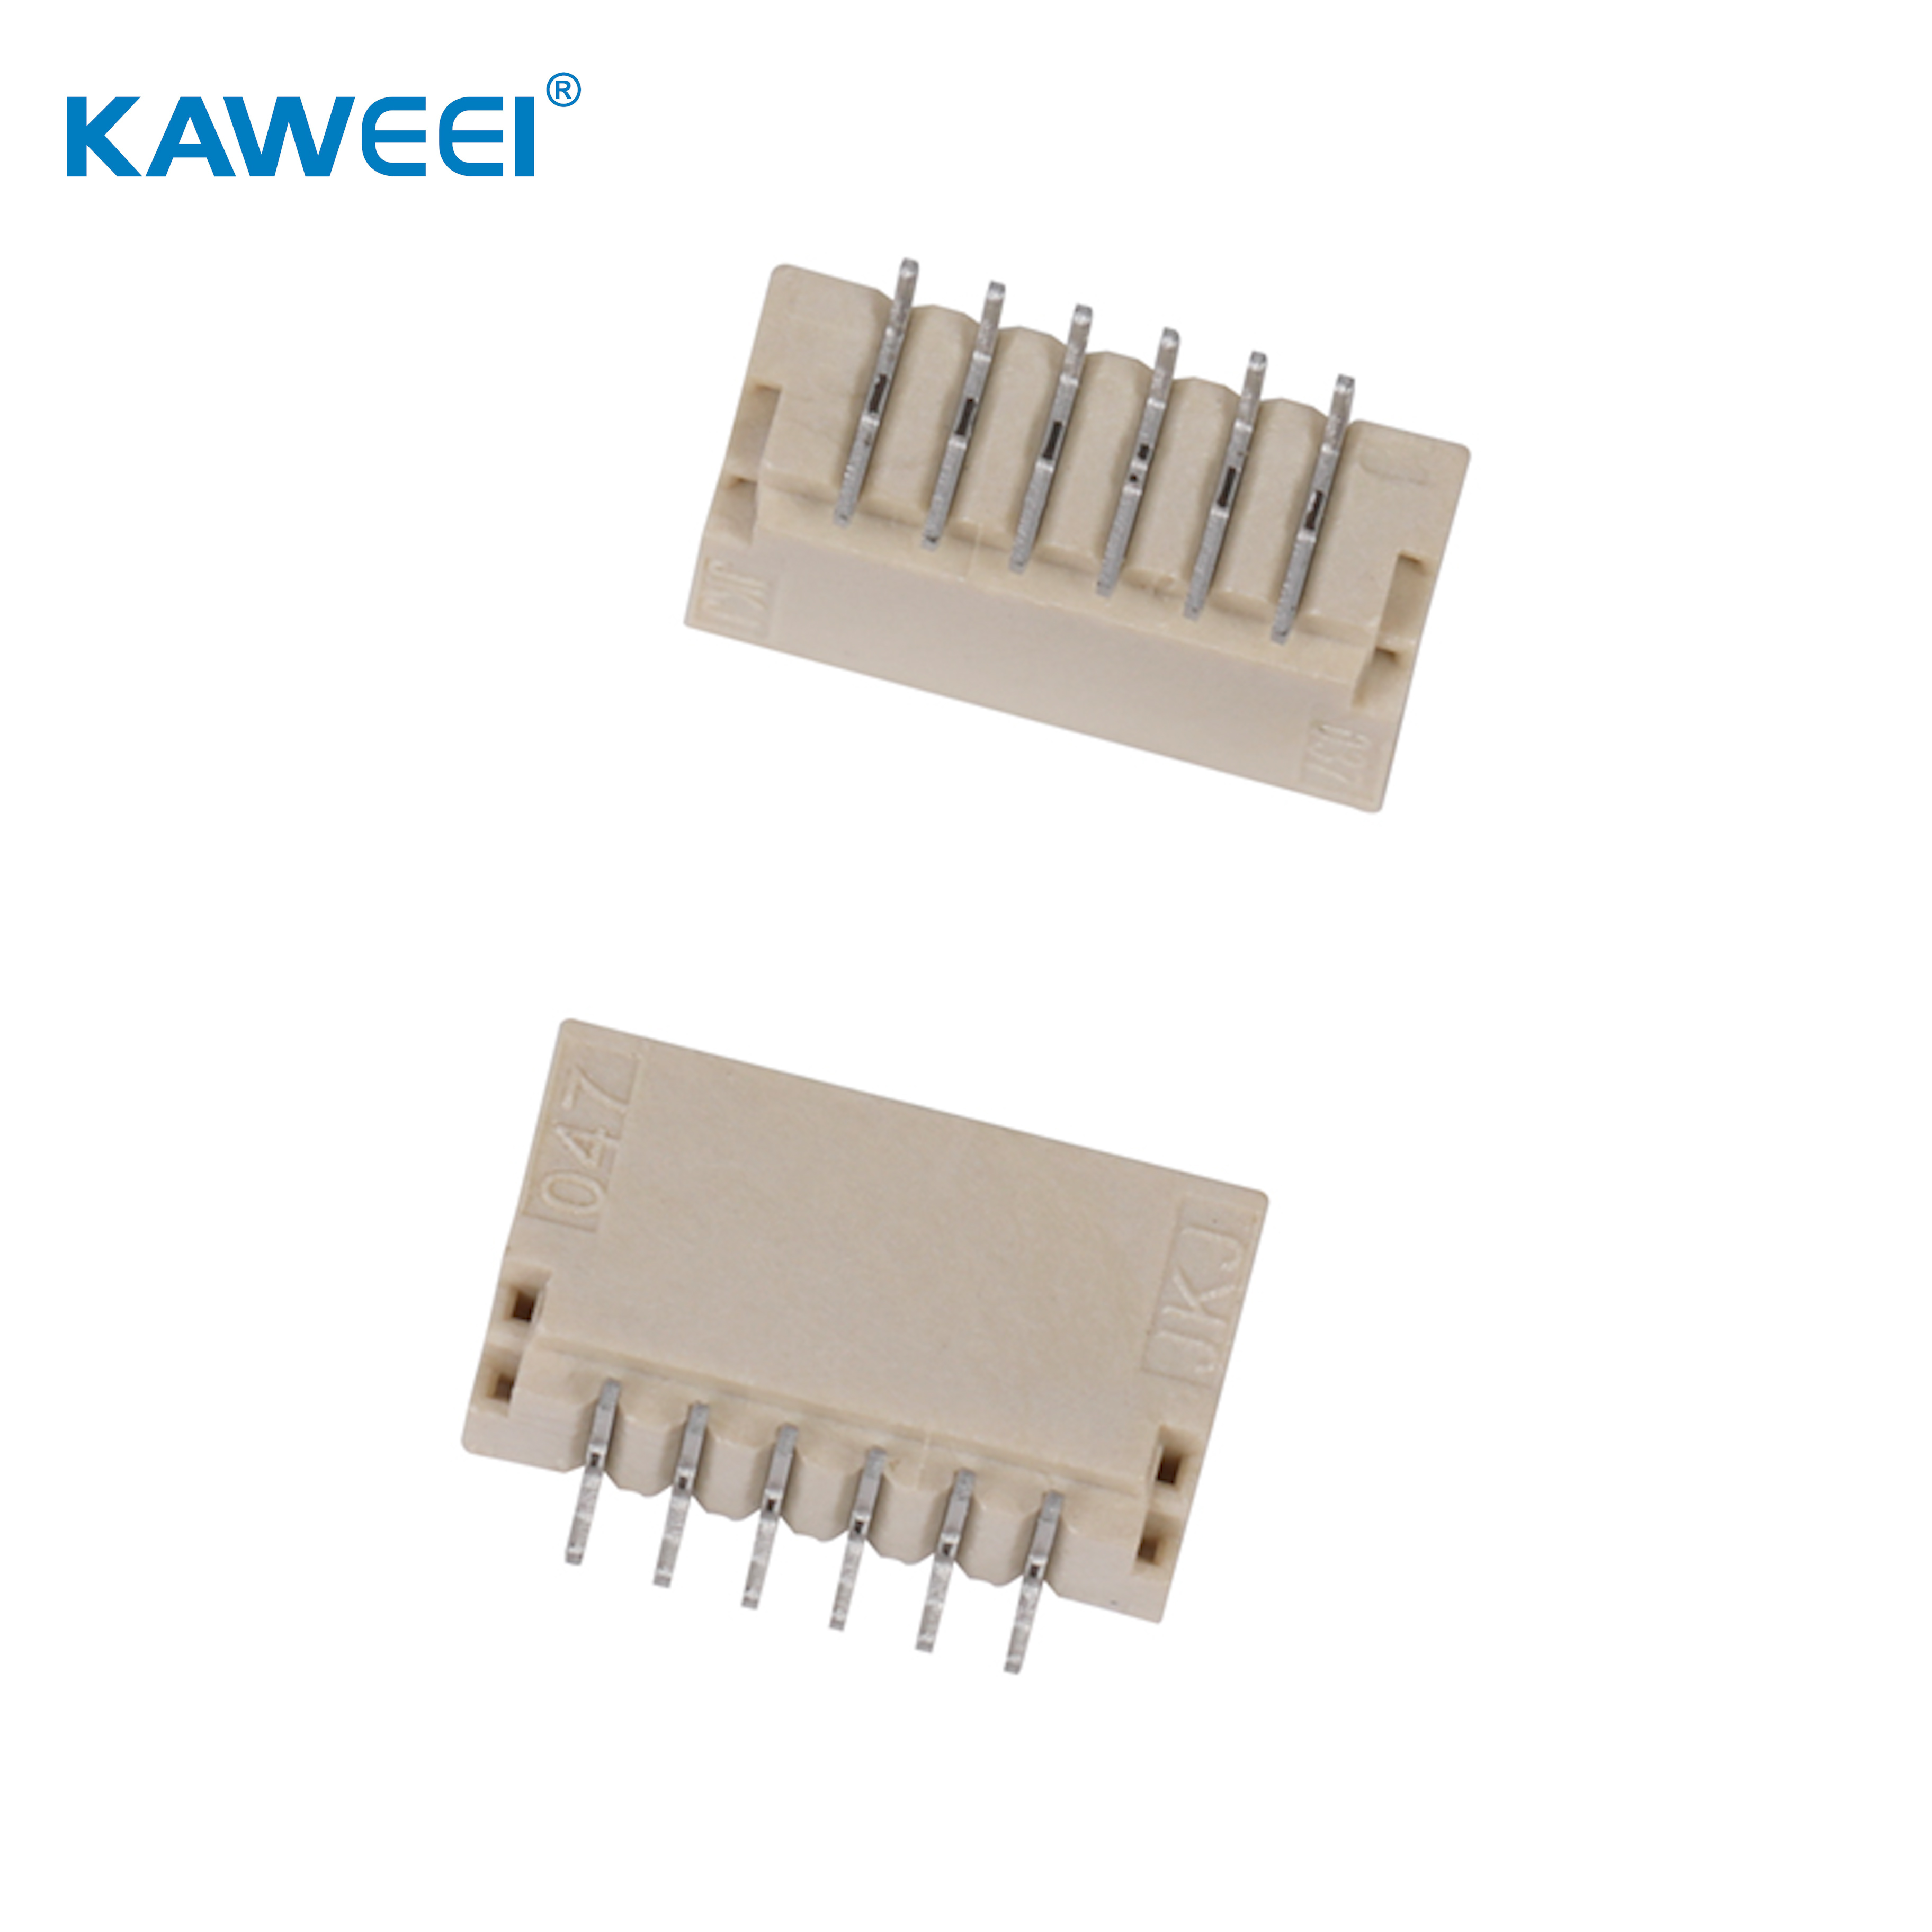 1.0mm pitch wafer wire to board connector PCB connector